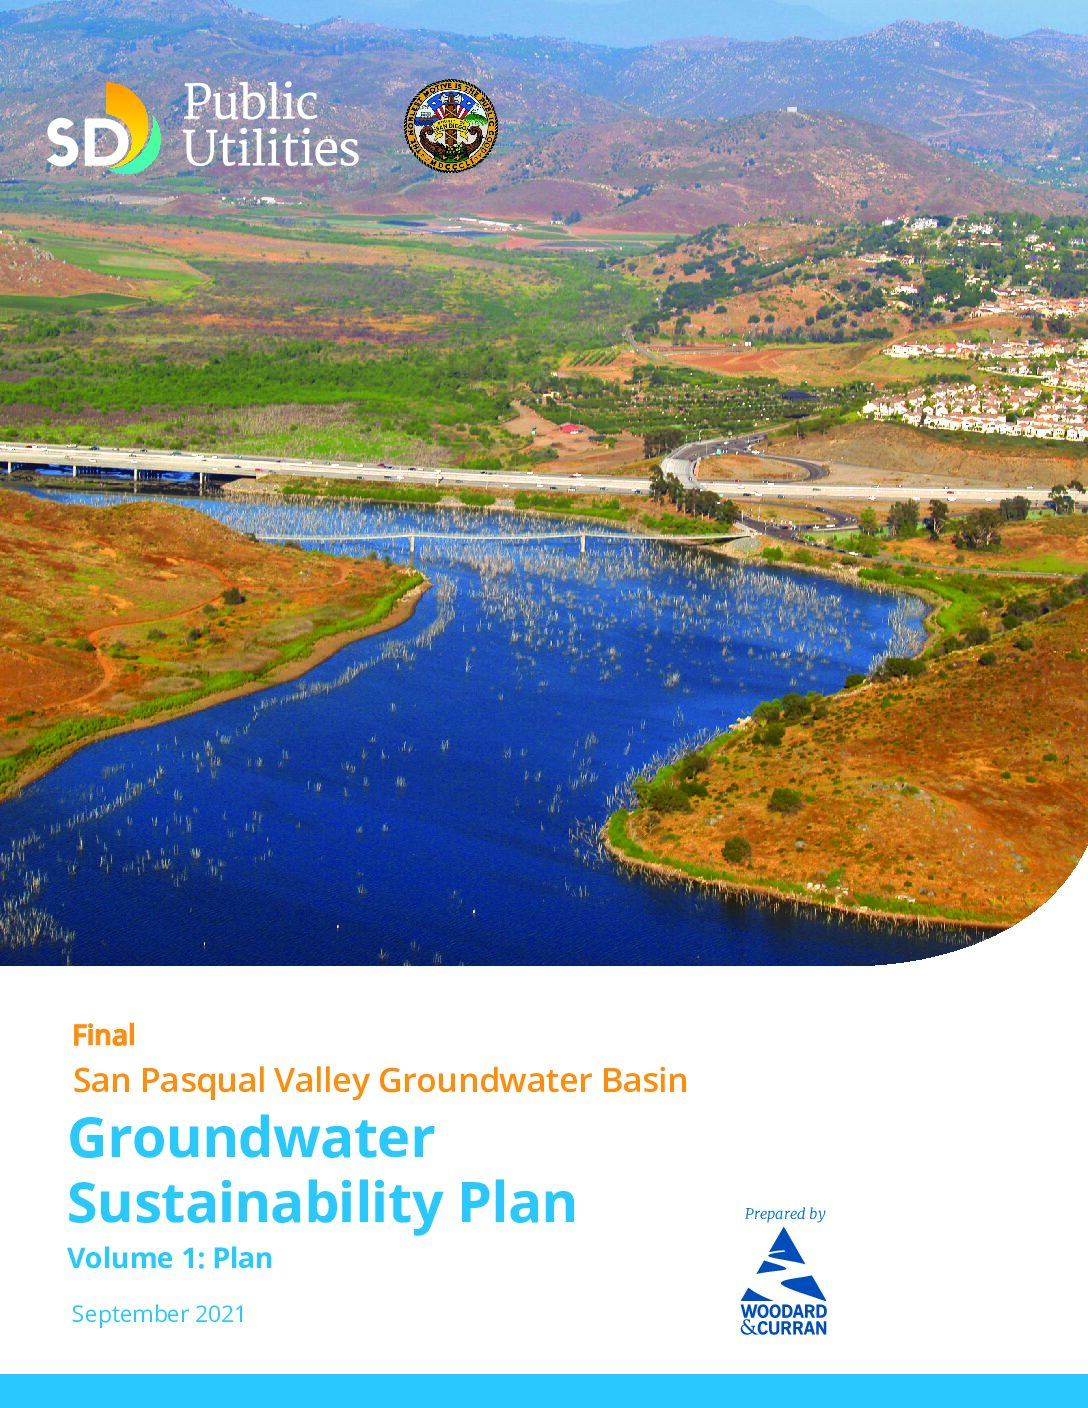 San Pasqual Valley Groundwater Basin Groundwater Sustainability Plan